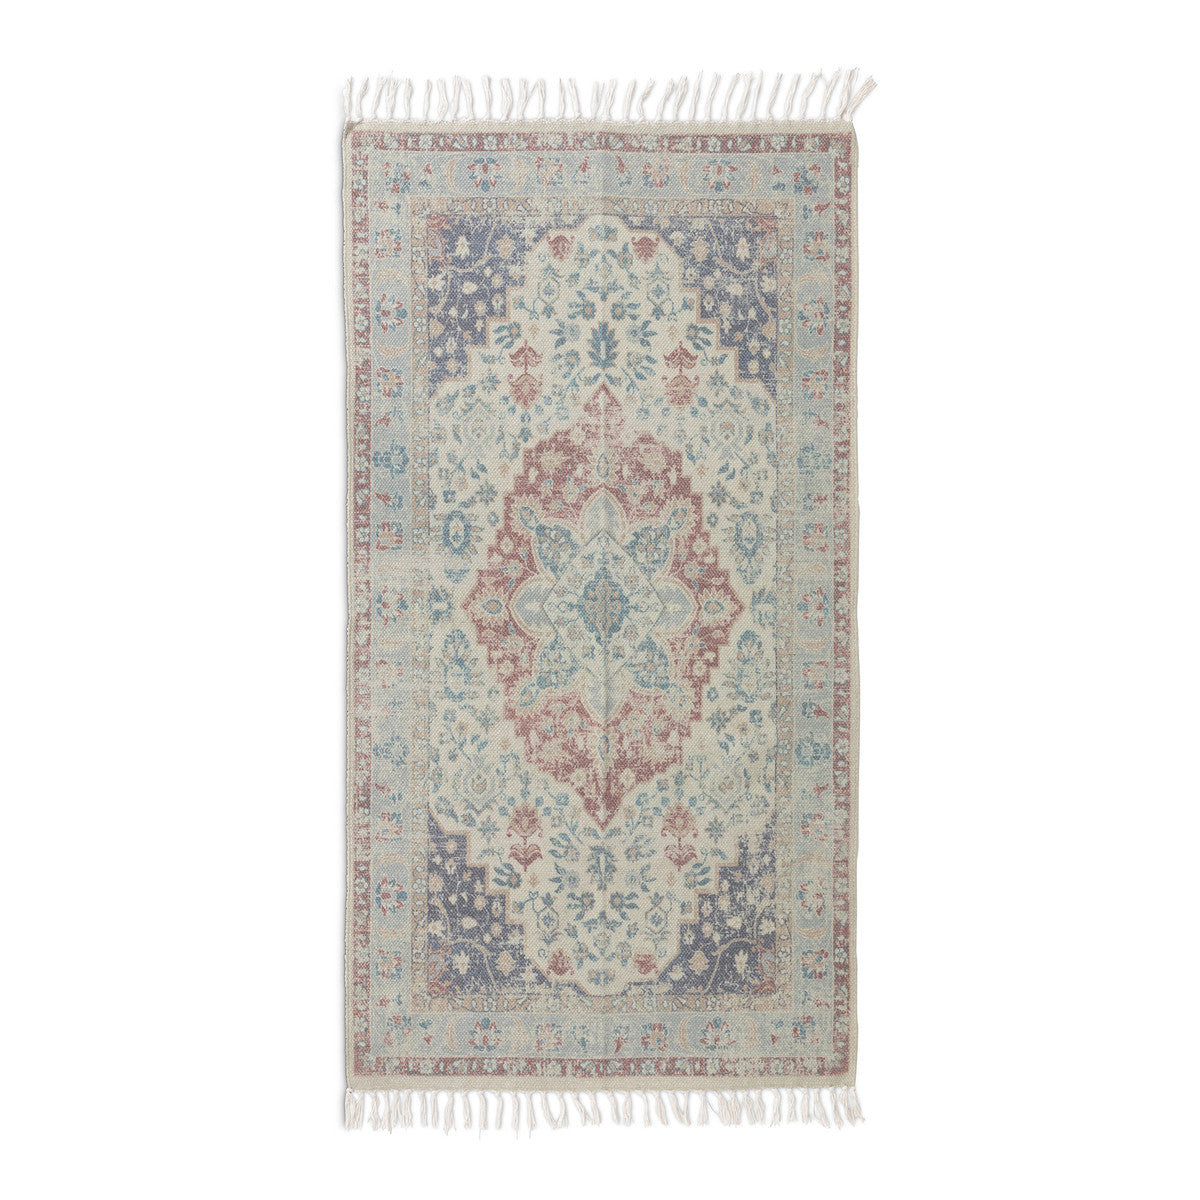 Park Hill Collection Cotton Printed Rug, Nutmeg, 3' X 5'